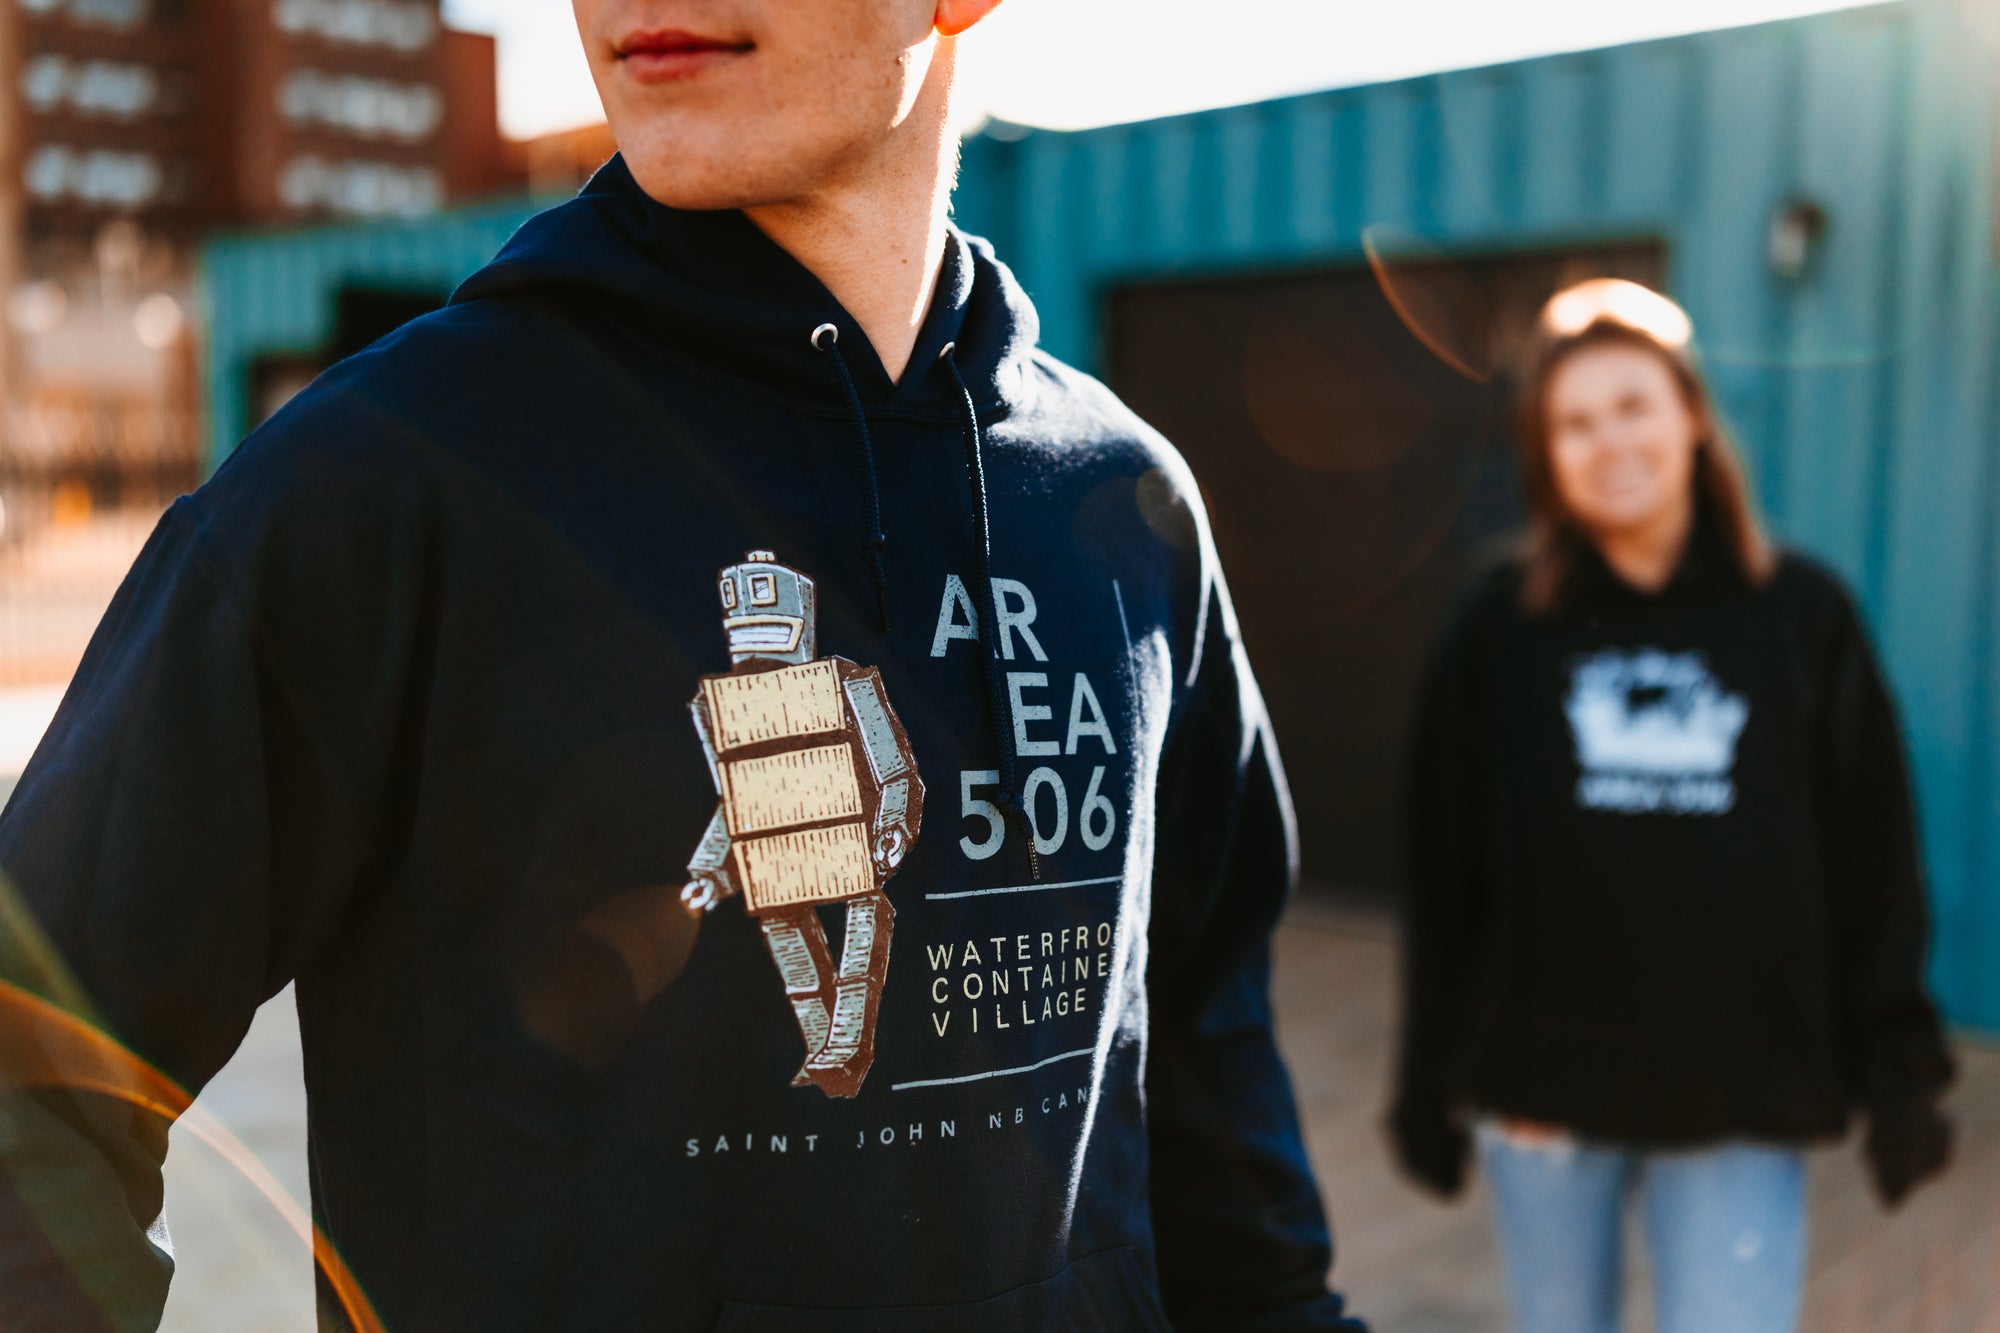 Waterfront Container Village Robot Hoodie